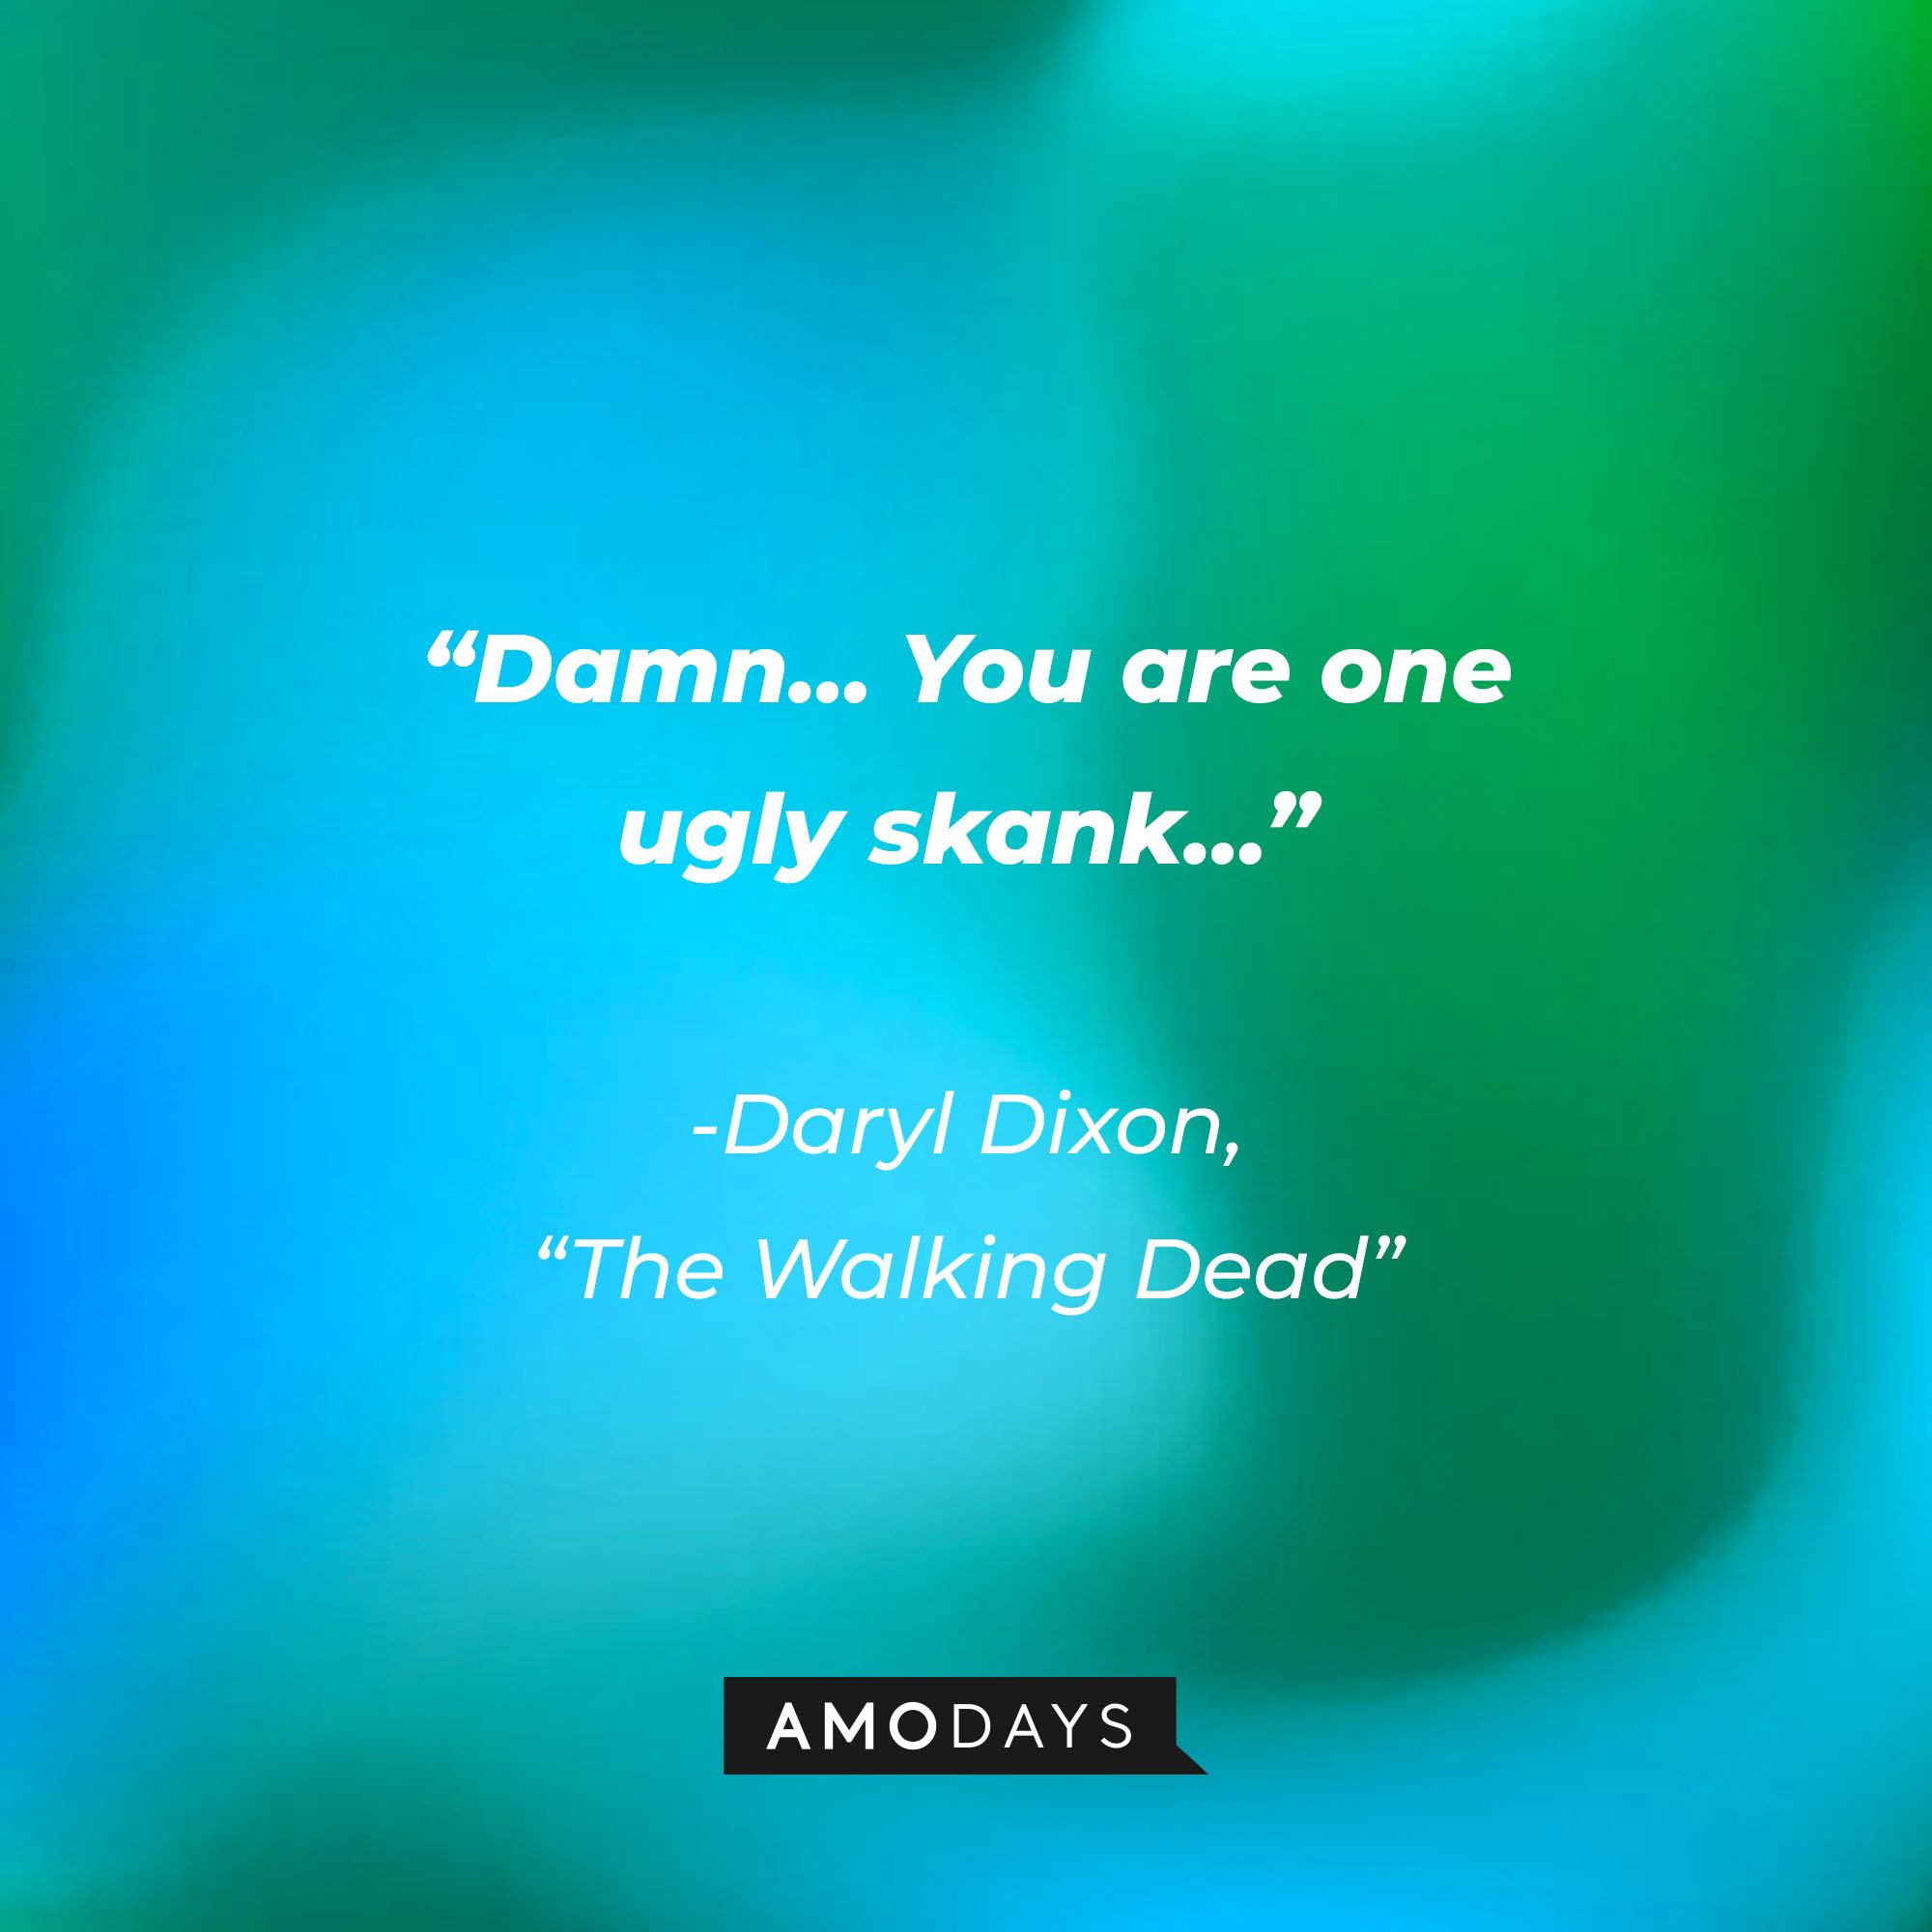 Daryl Dixon’s quote from “The Walking Dead”: “Damn… You are one ugly skank…” | Source: AmoDays